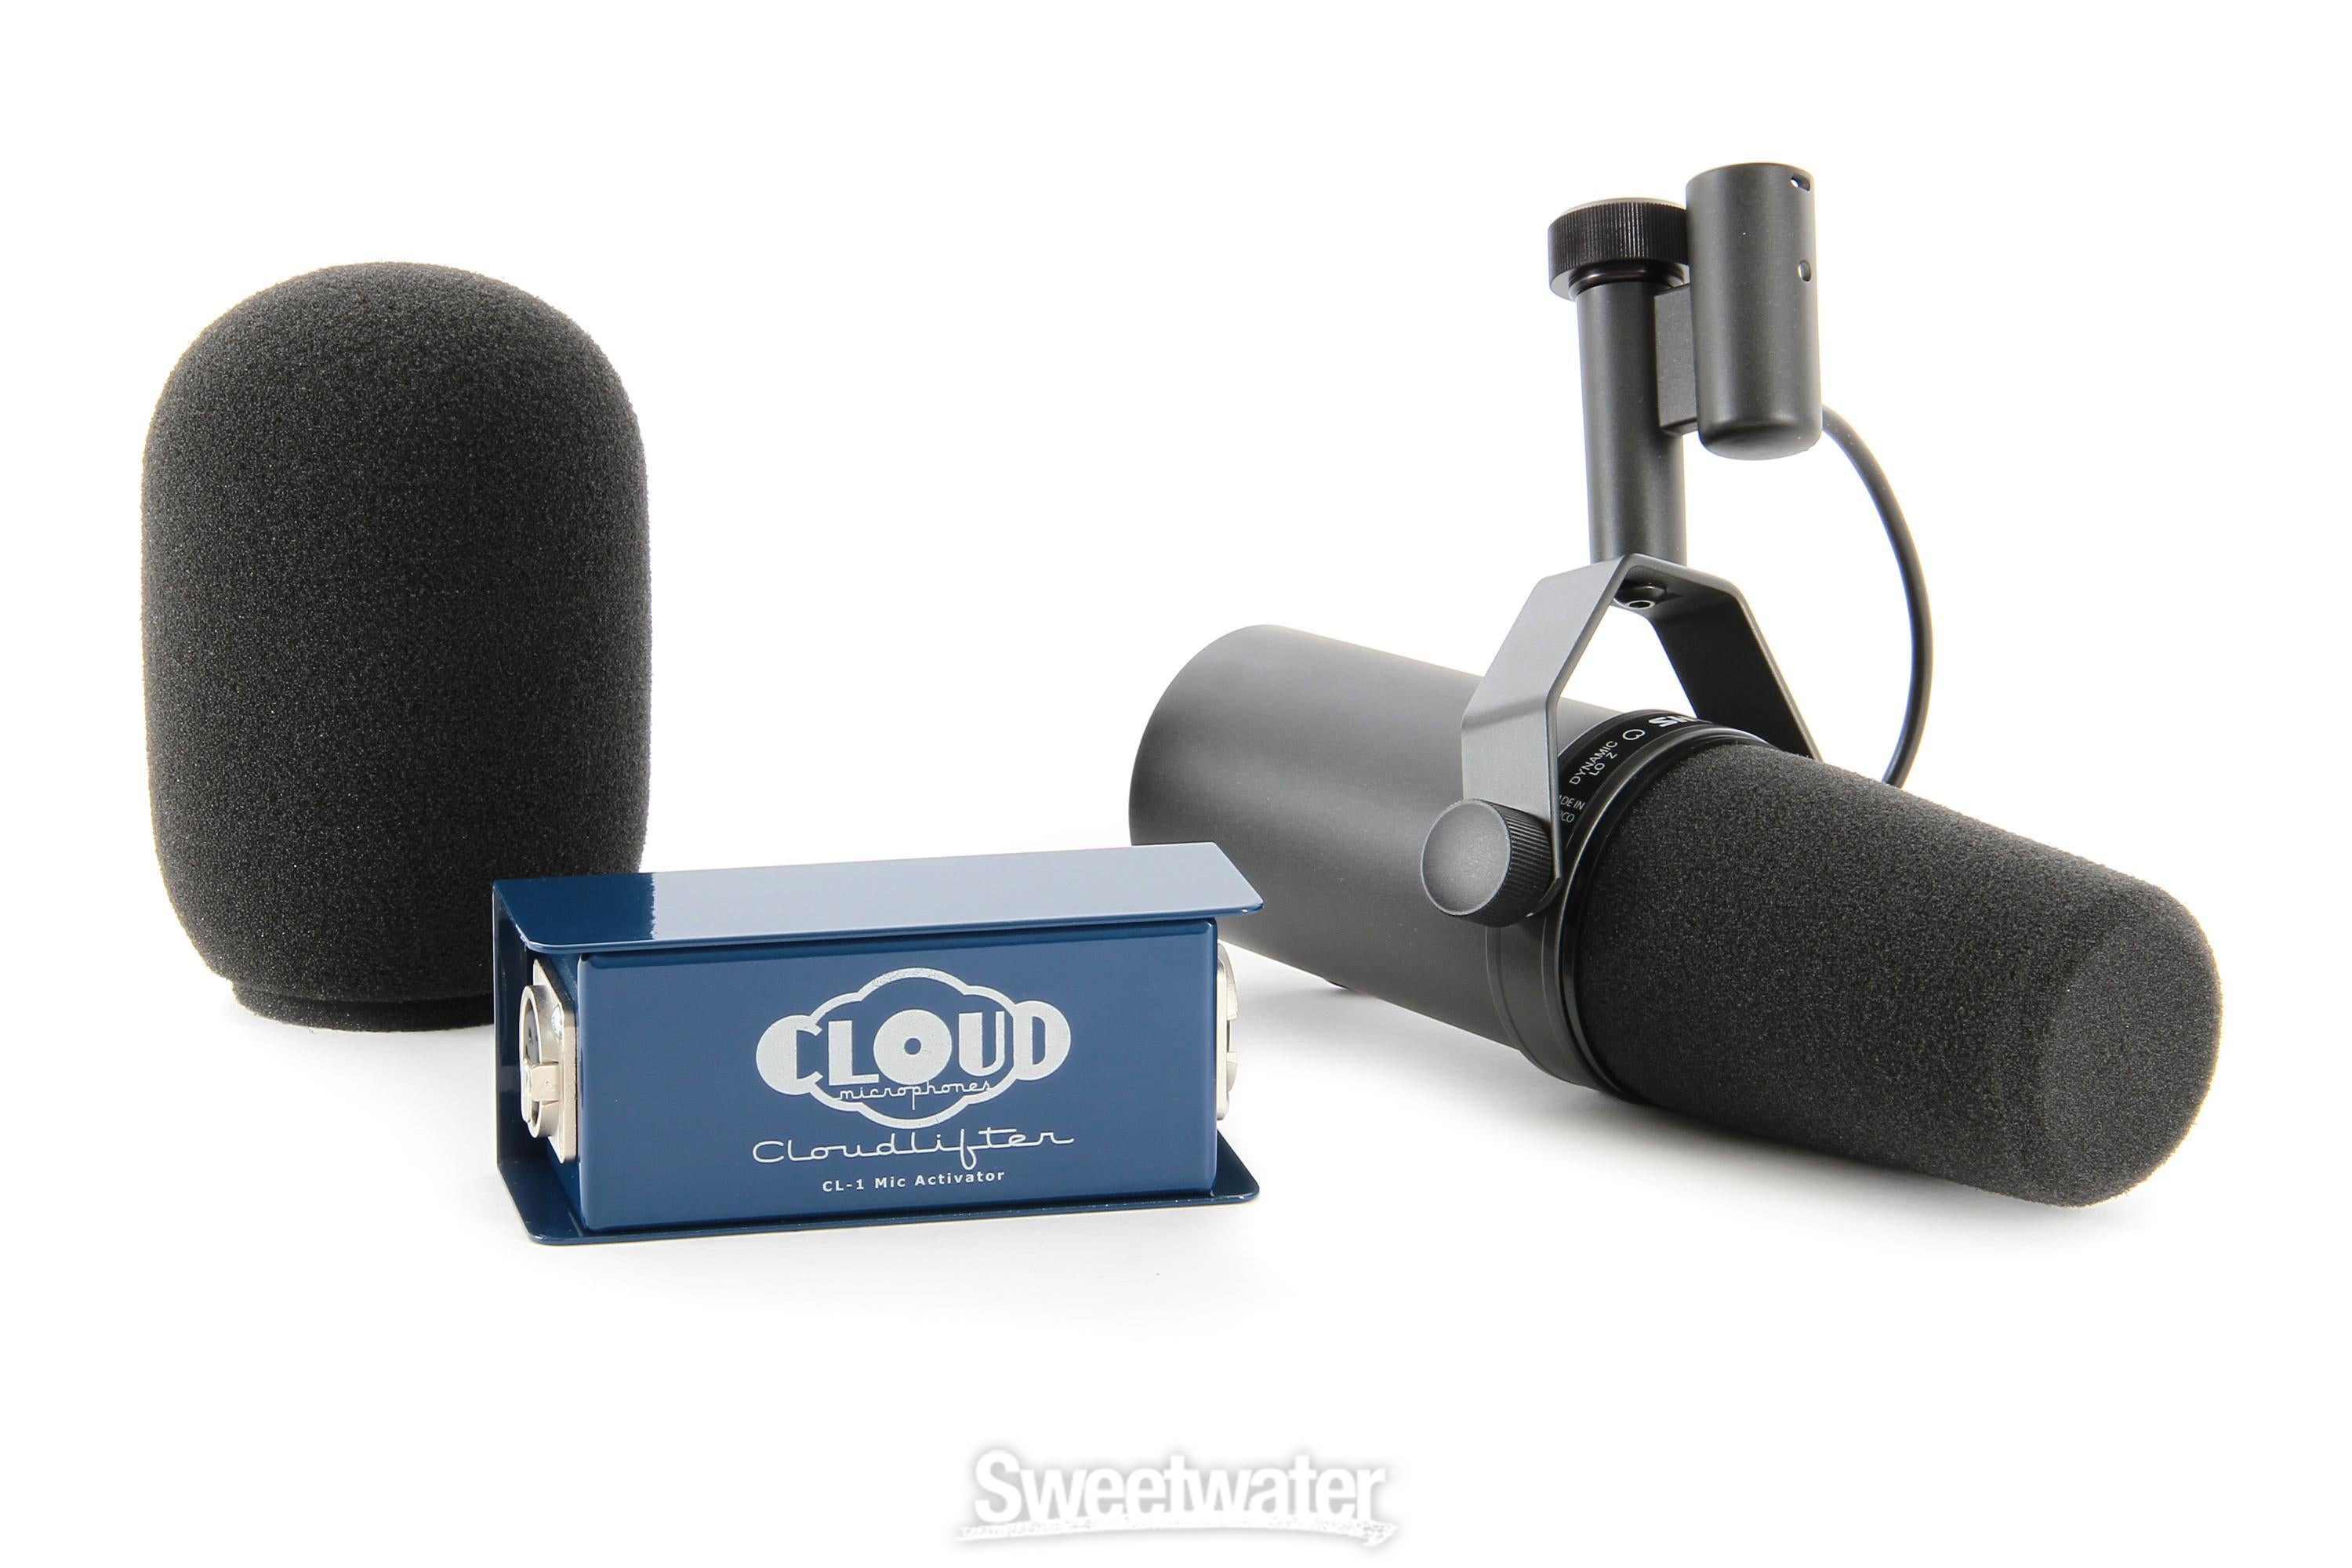 Shure SM7B Dynamic Microphone and CL-1 Cloudlifter Kit with Stand 